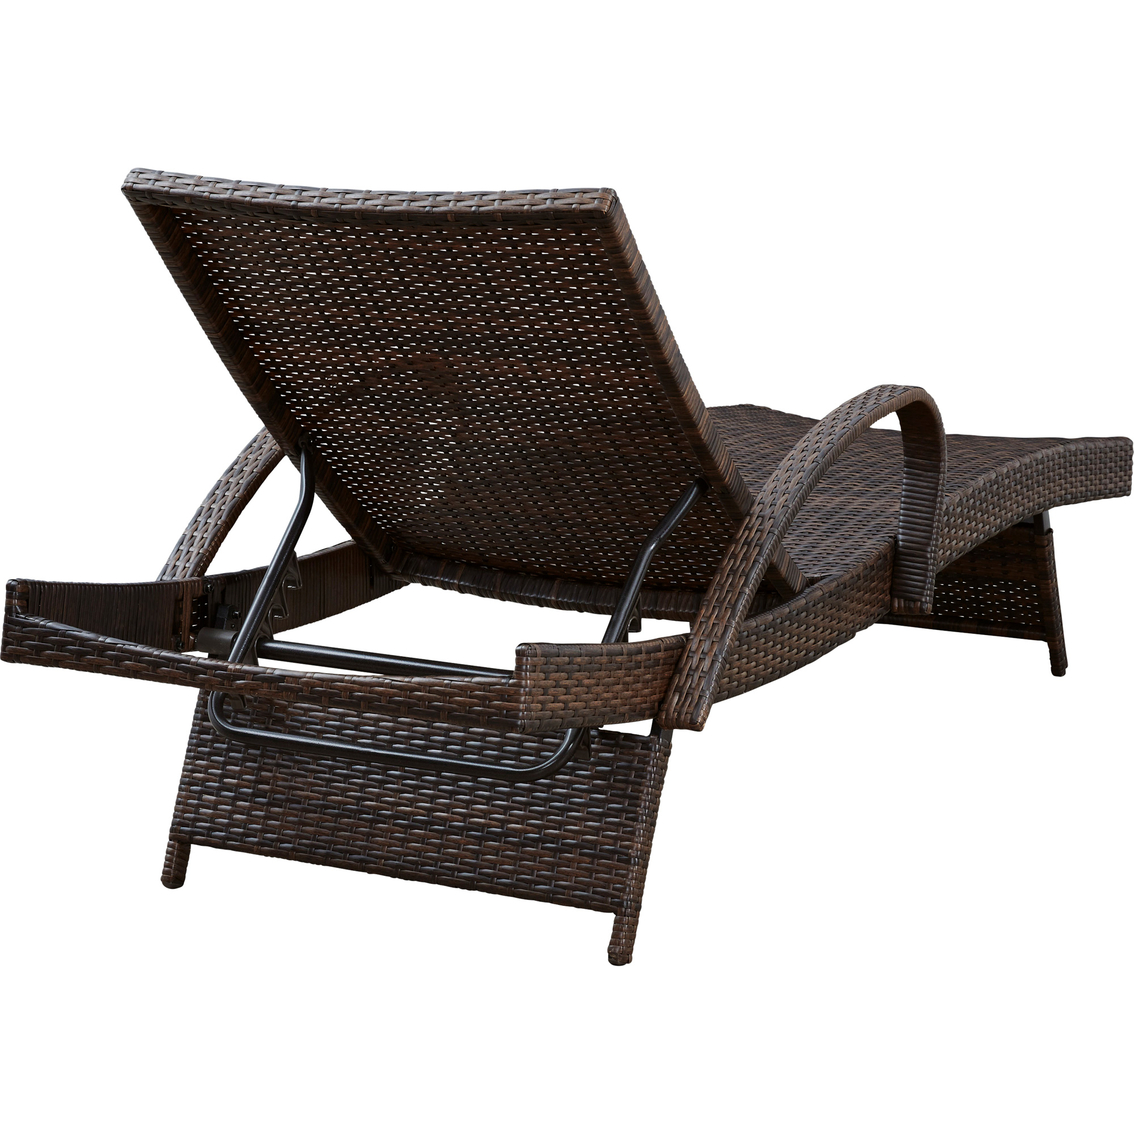 Signature Design by Ashley Kantana Outdoor Chaise Lounge 2 pk. - Image 5 of 6